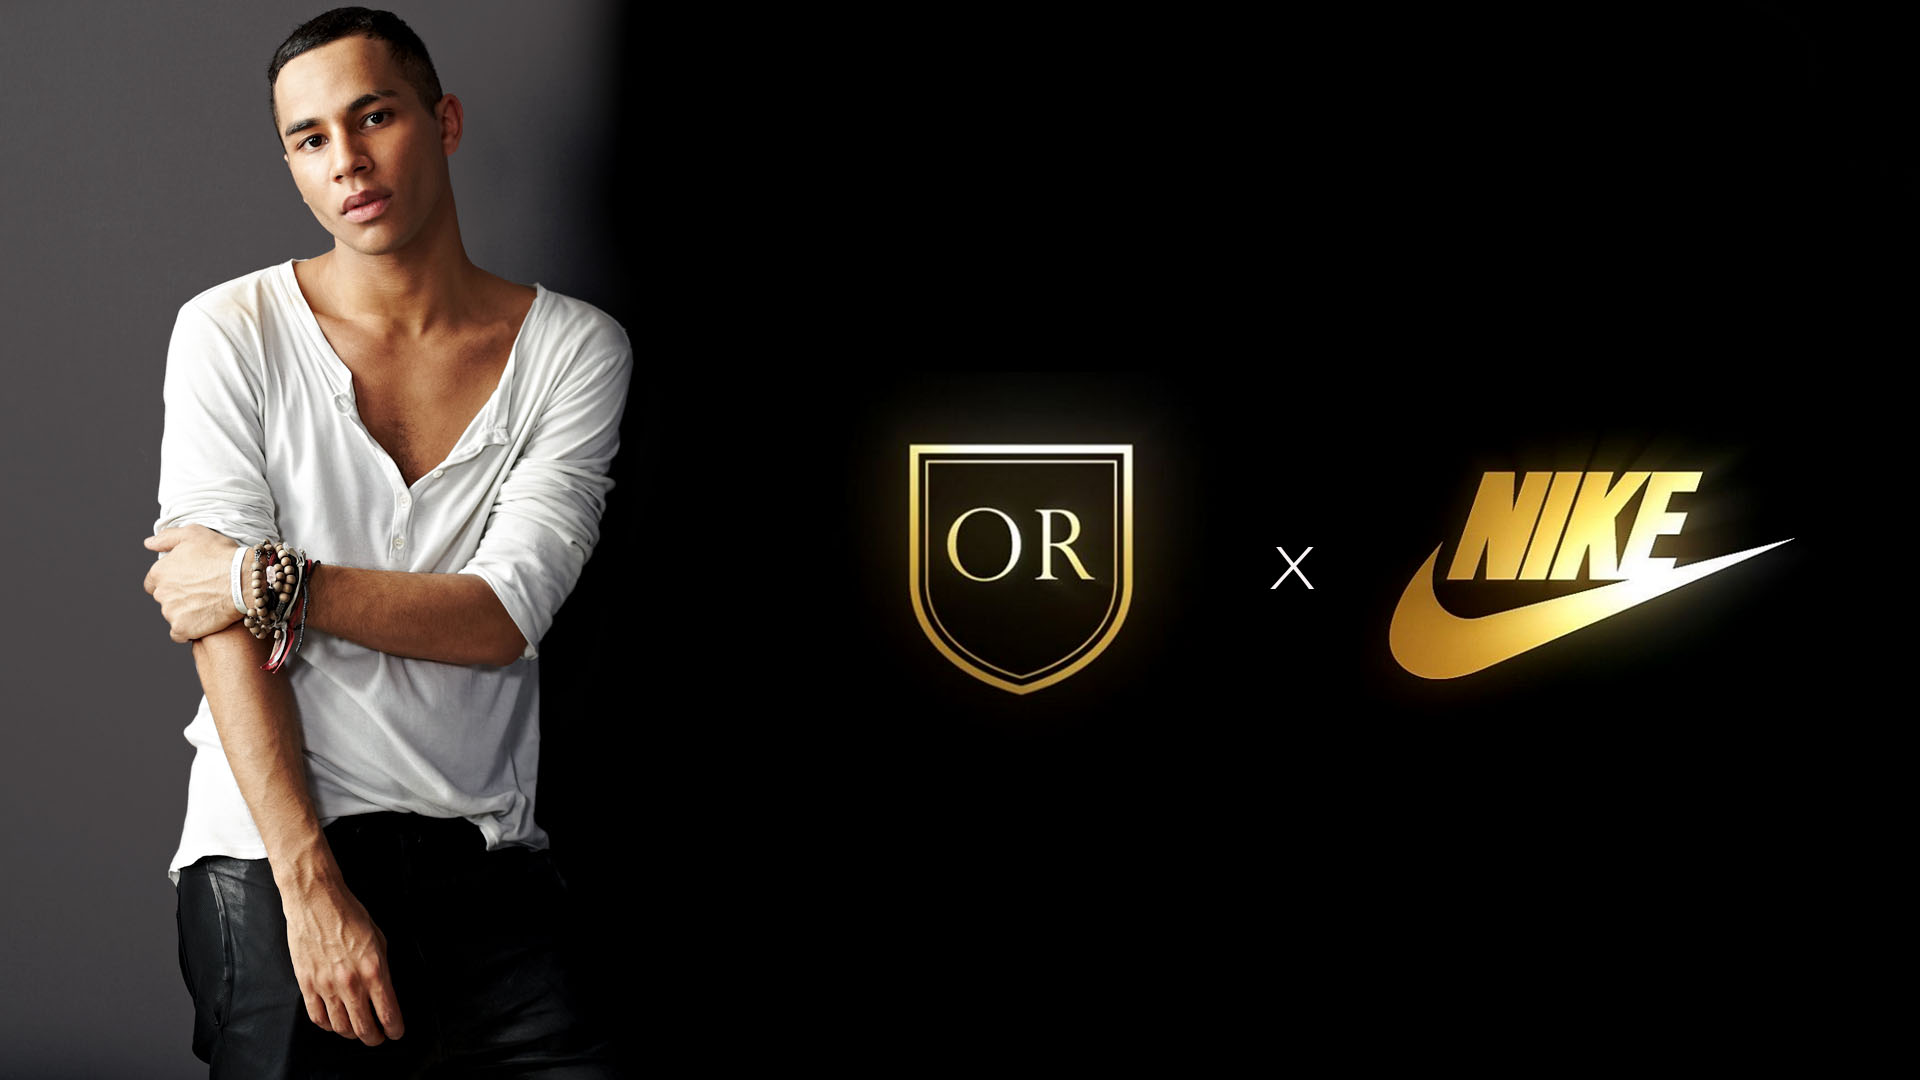 OLIVIER ROUSTEING OF BALMAIN CONFIRMS NIKELAB COLLABORATION